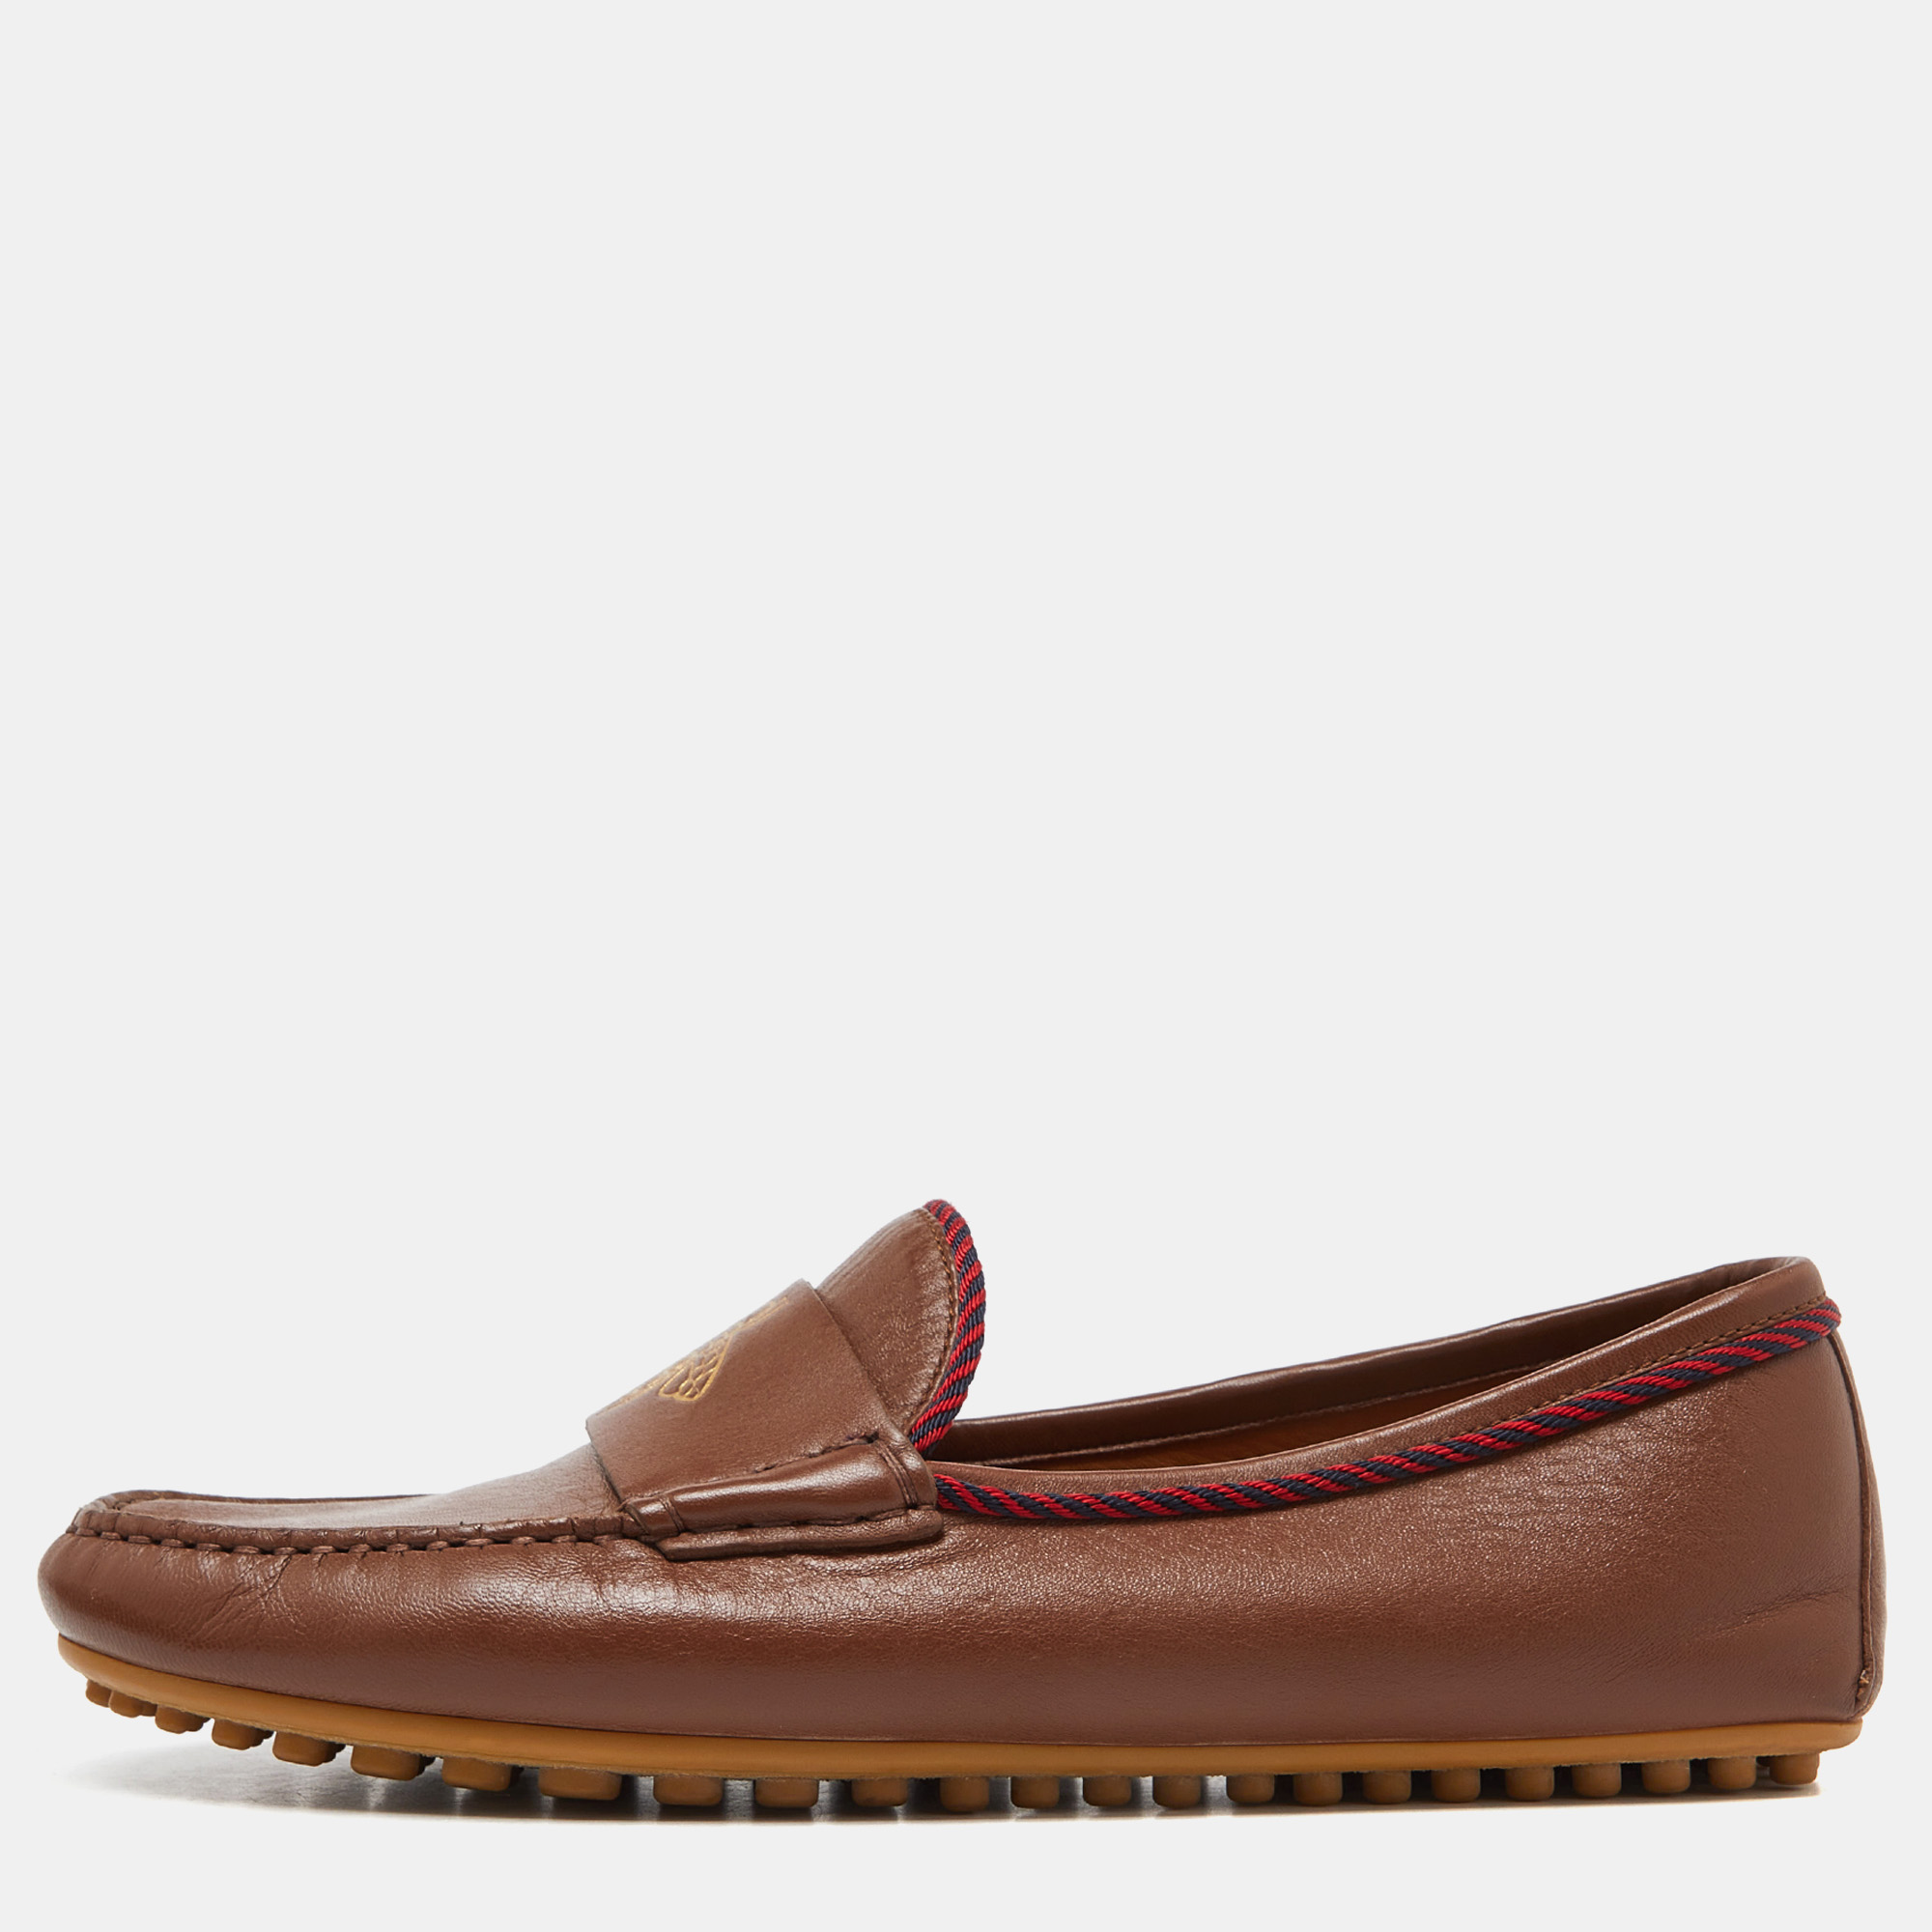 Gucci brown leather slip on loafers size 41